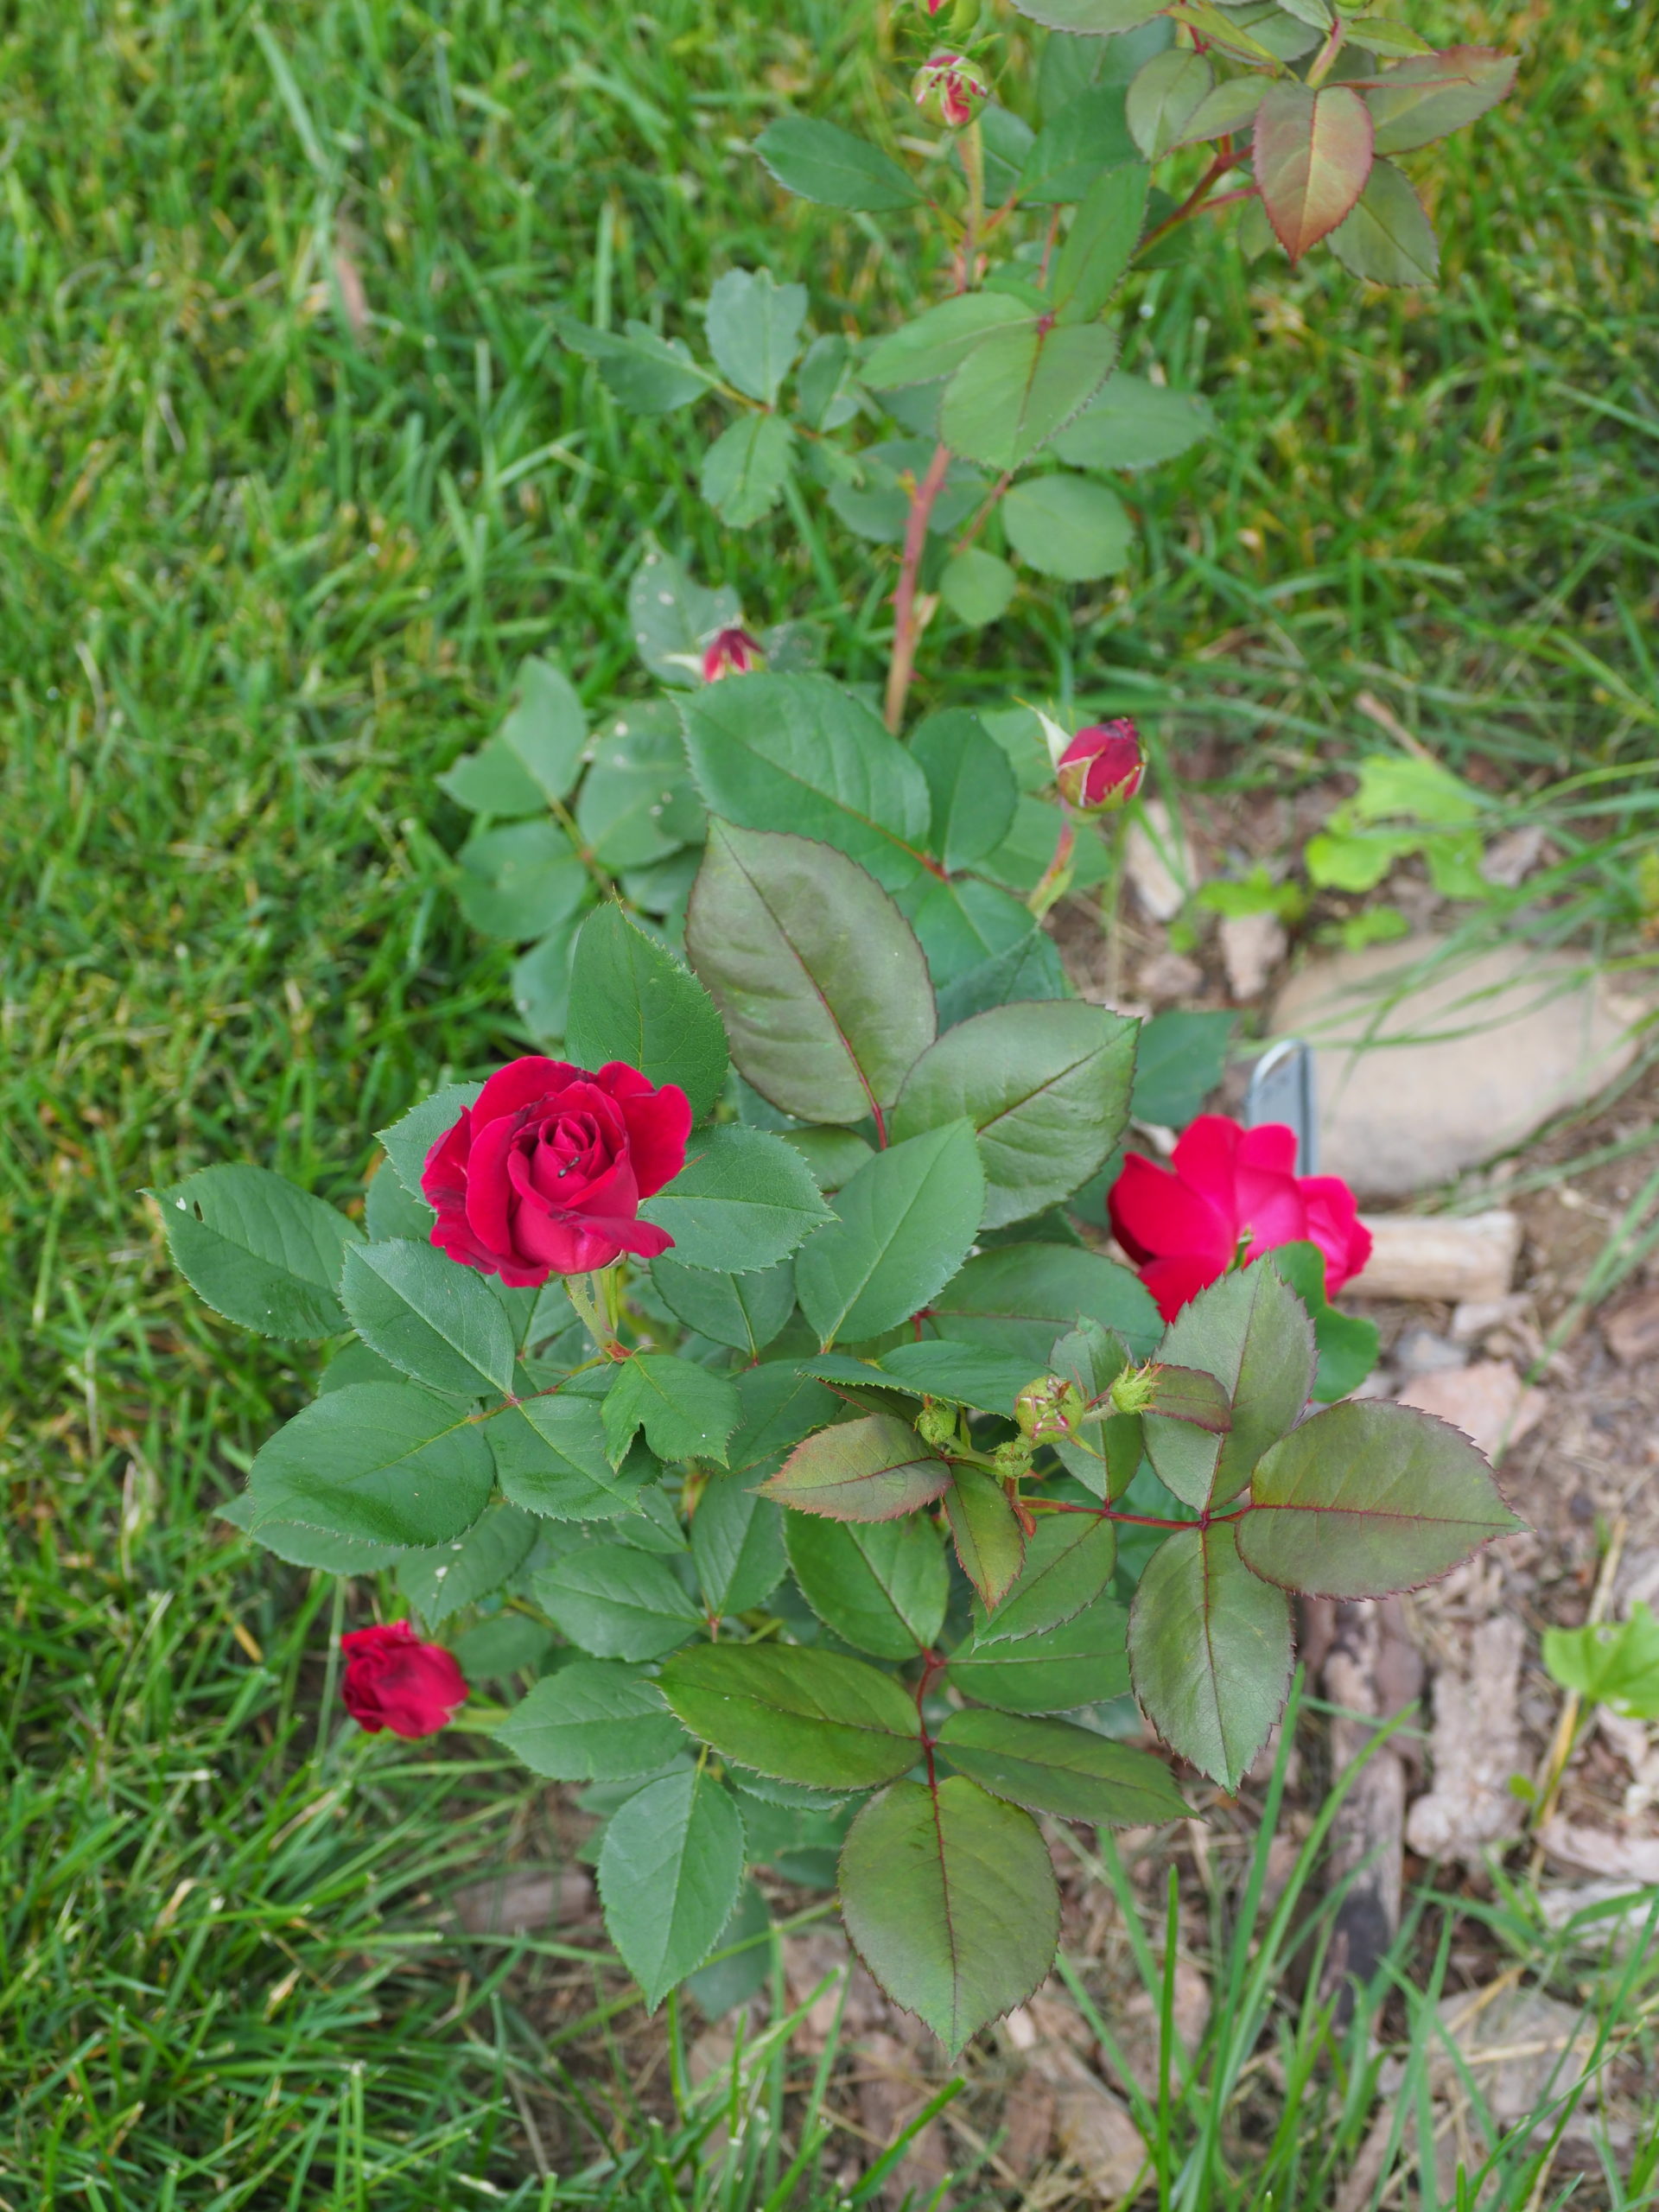 By mid-June, the Sweet Spirit rose was a passing 2 feet tall and blooming, but don’t expect similar results from bare rooted fruit trees, which can take several years to flower and fruit once planted.